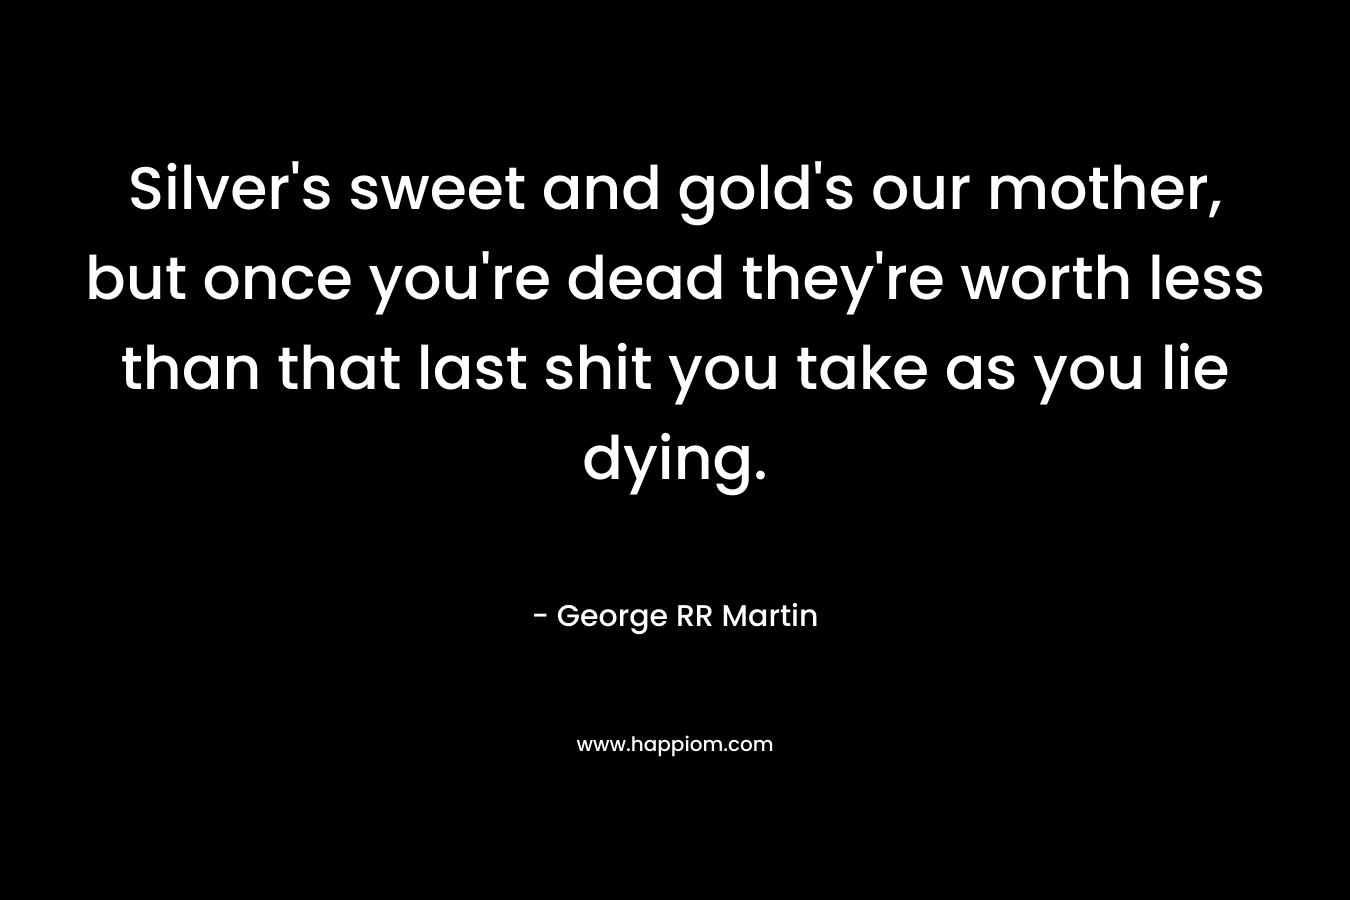 Silver’s sweet and gold’s our mother, but once you’re dead they’re worth less than that last shit you take as you lie dying. – George RR Martin